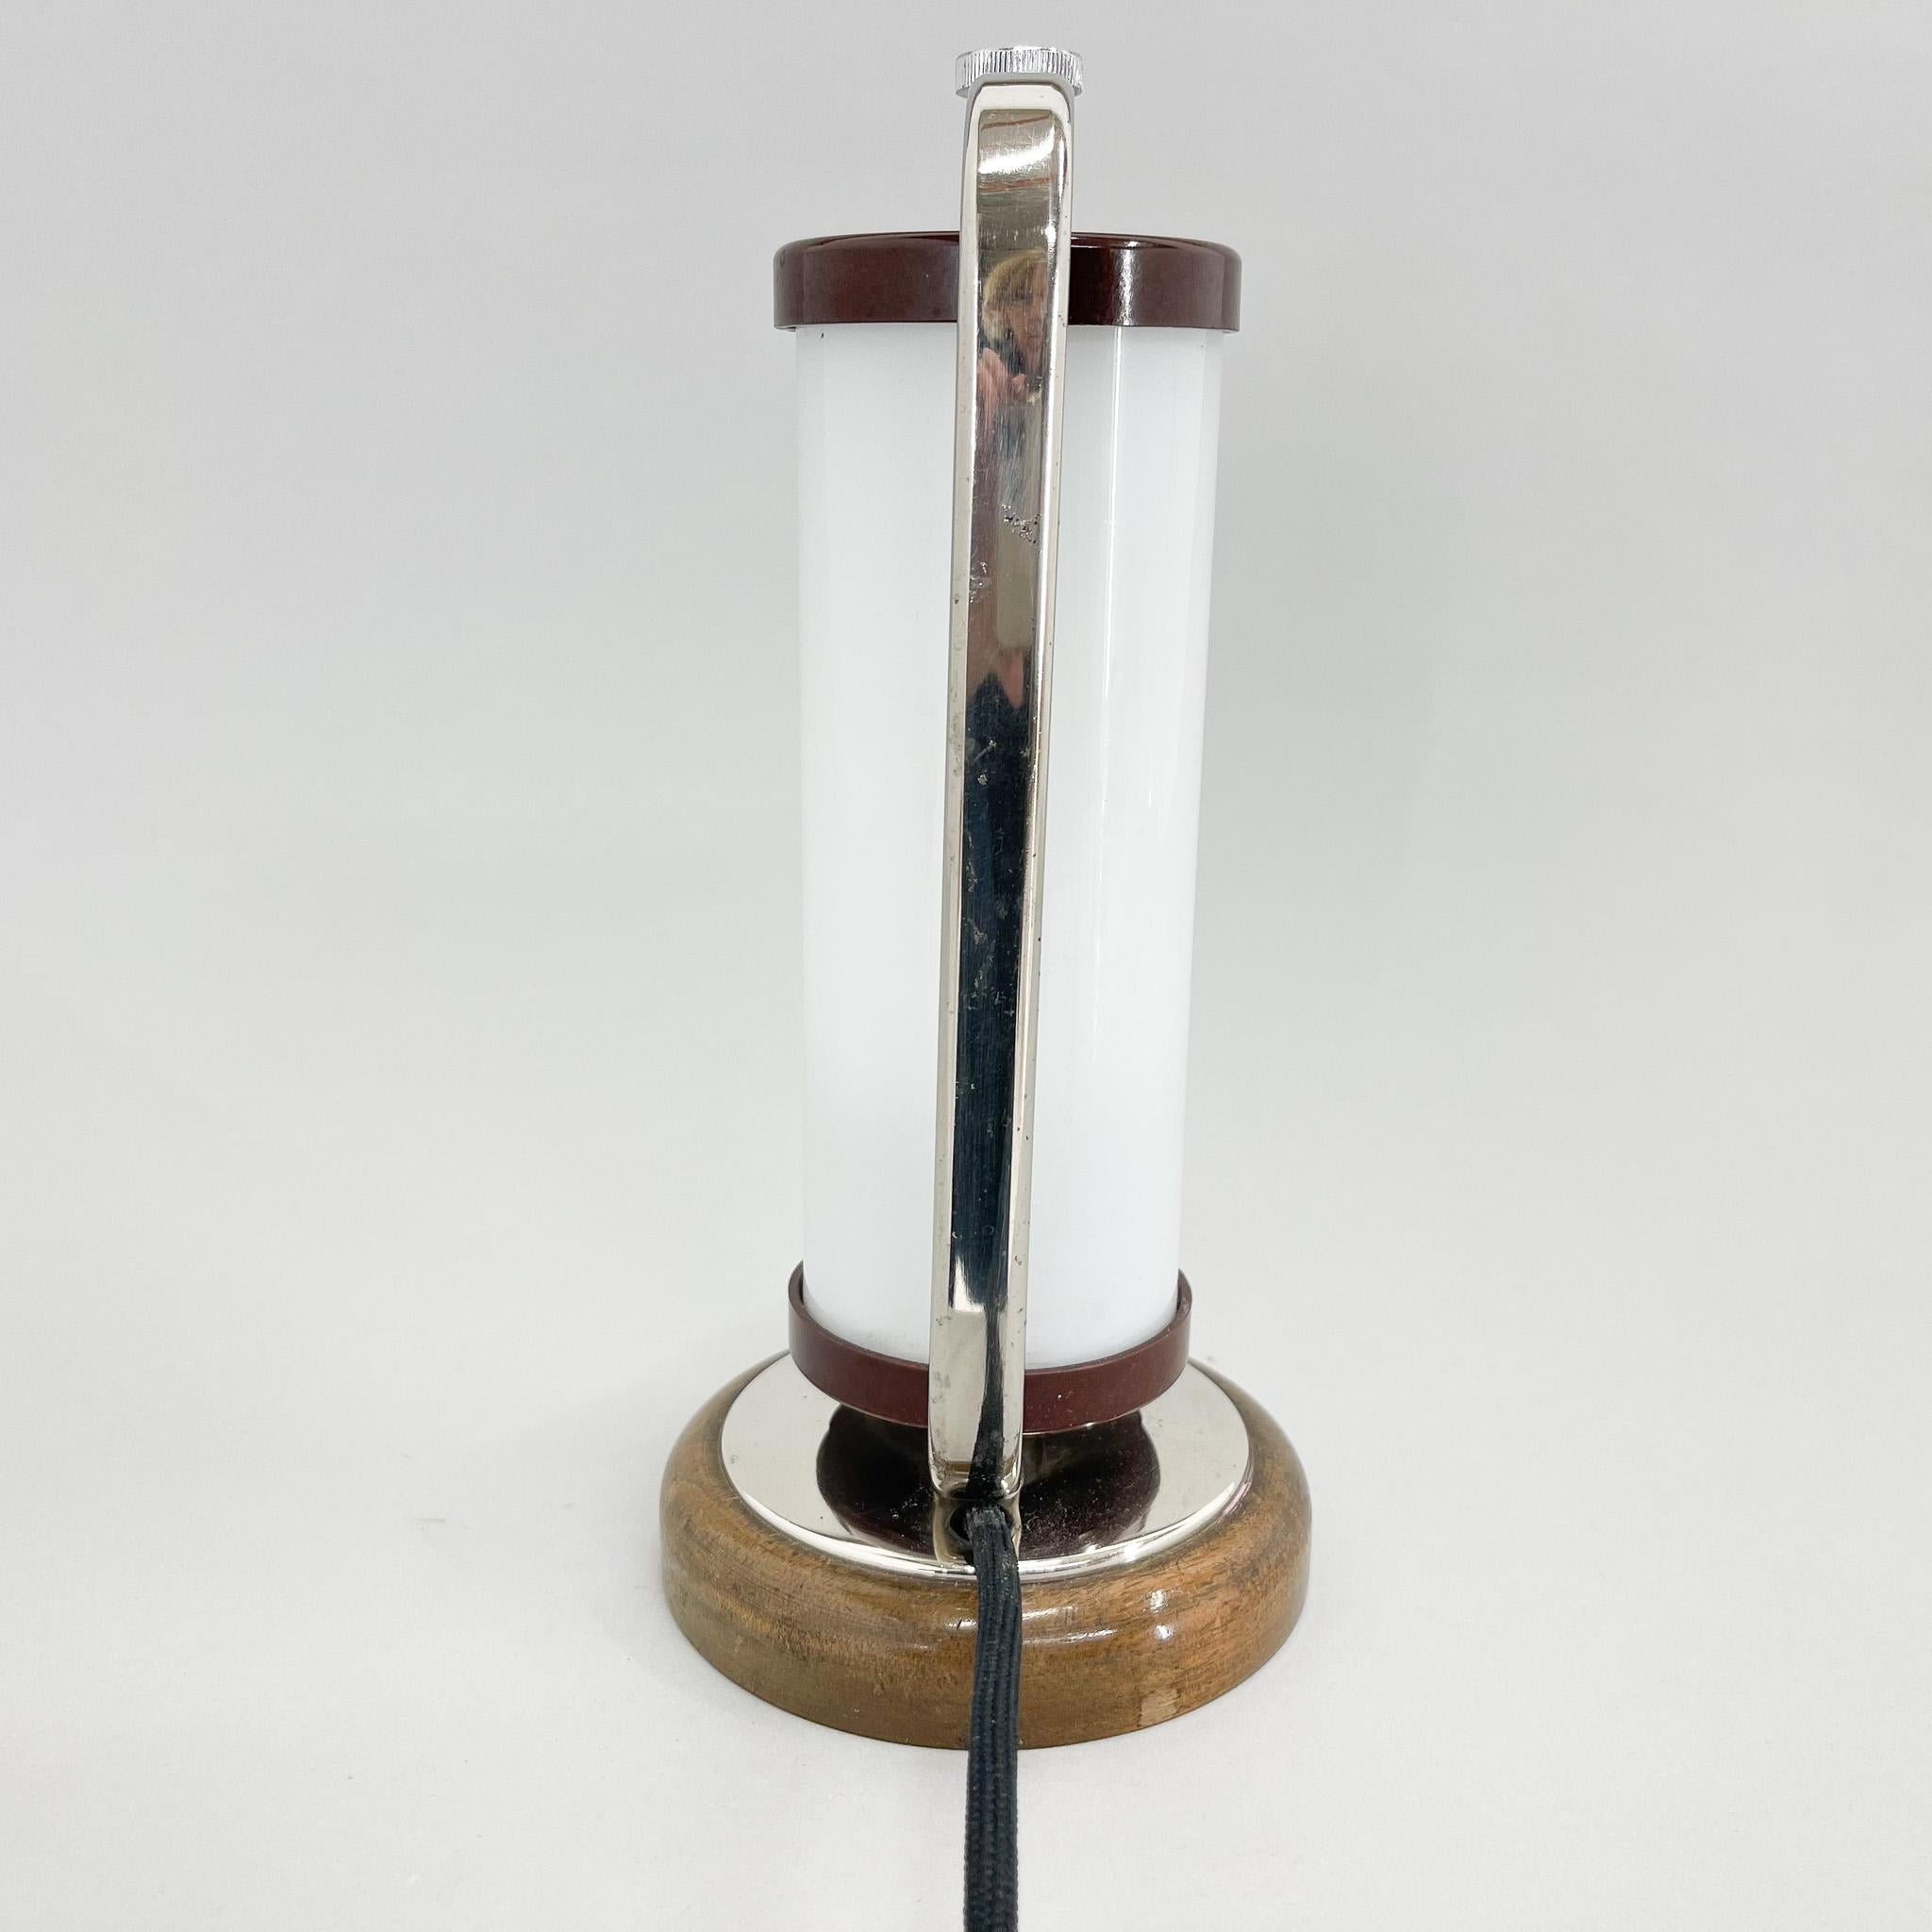 20th Century Tubular Table or Bedside Lamp with Wooden Base, 1930's For Sale